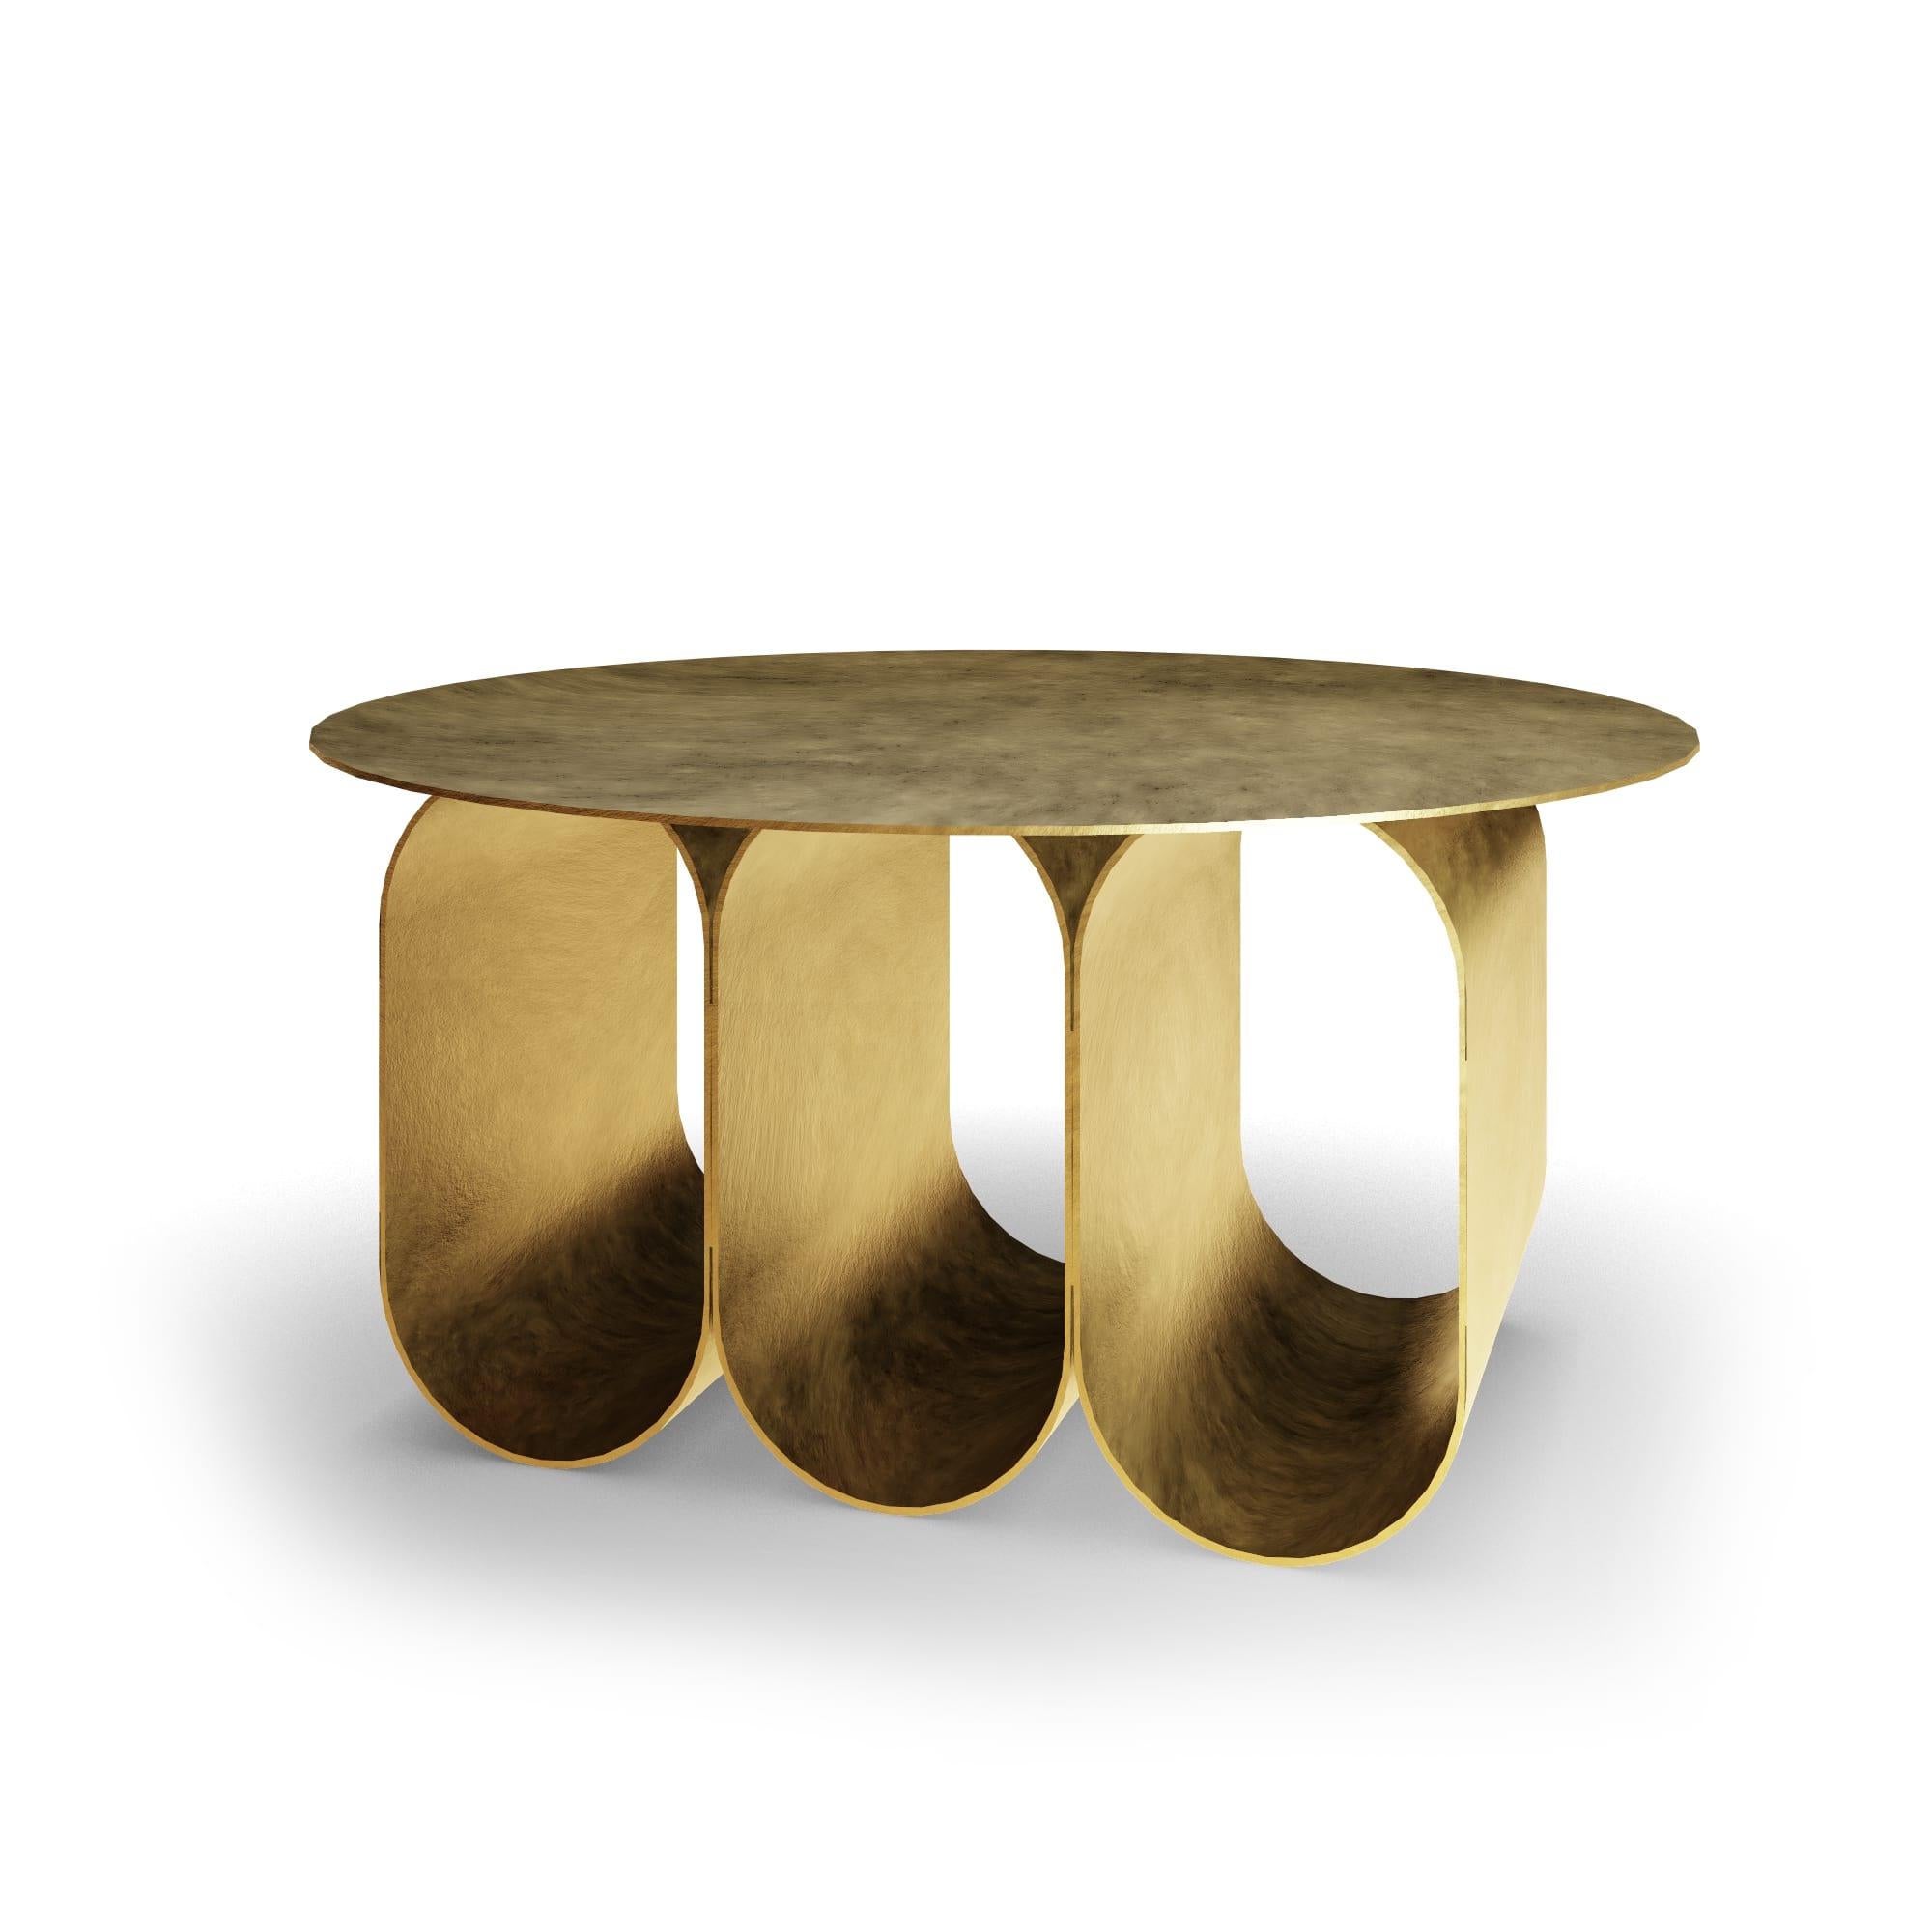 The Arcade coffee table - 3 arches round version - gold, has been created By Kasadamo in collaboration with Pierre Tassin, french designer. This table reflects a mix between old and futuristic architecture. Its identity is found in the arched legs,